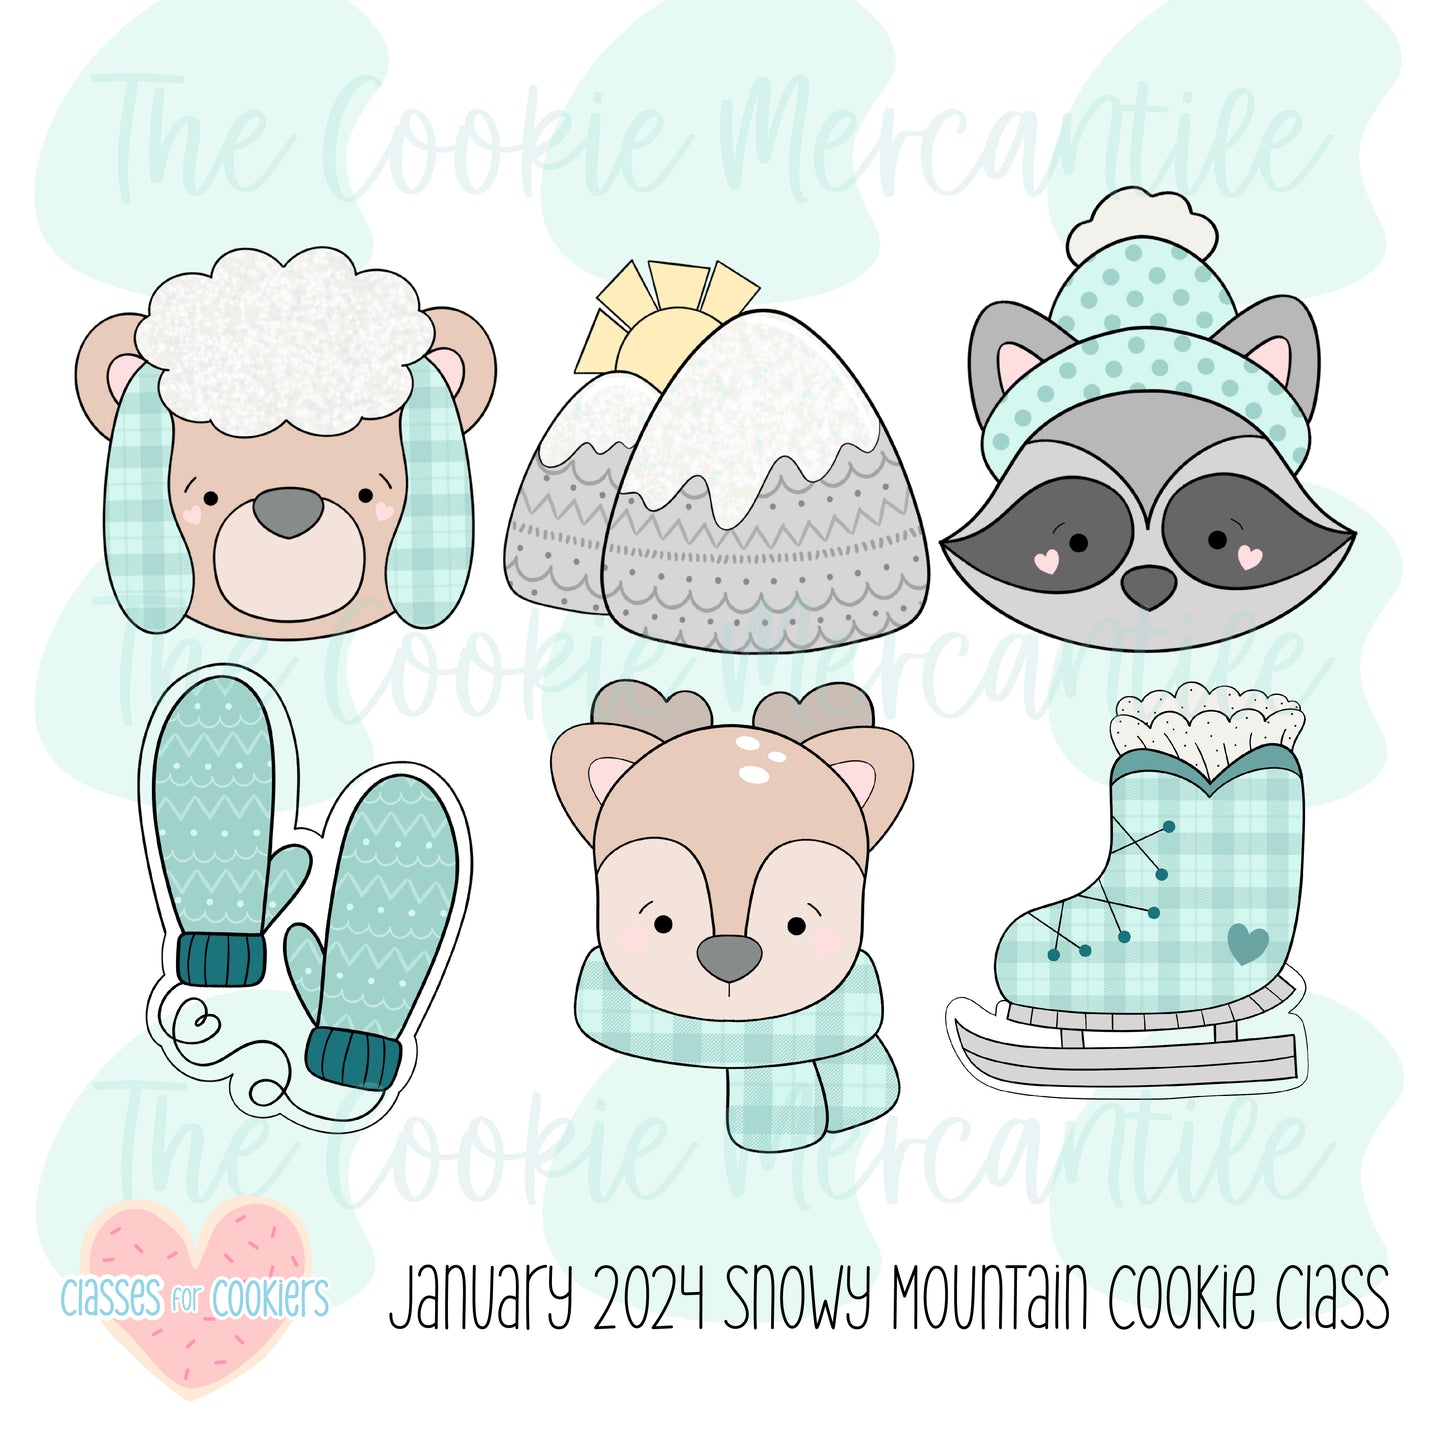 Snowy Mountain Theme Set - Classes for Cookiers